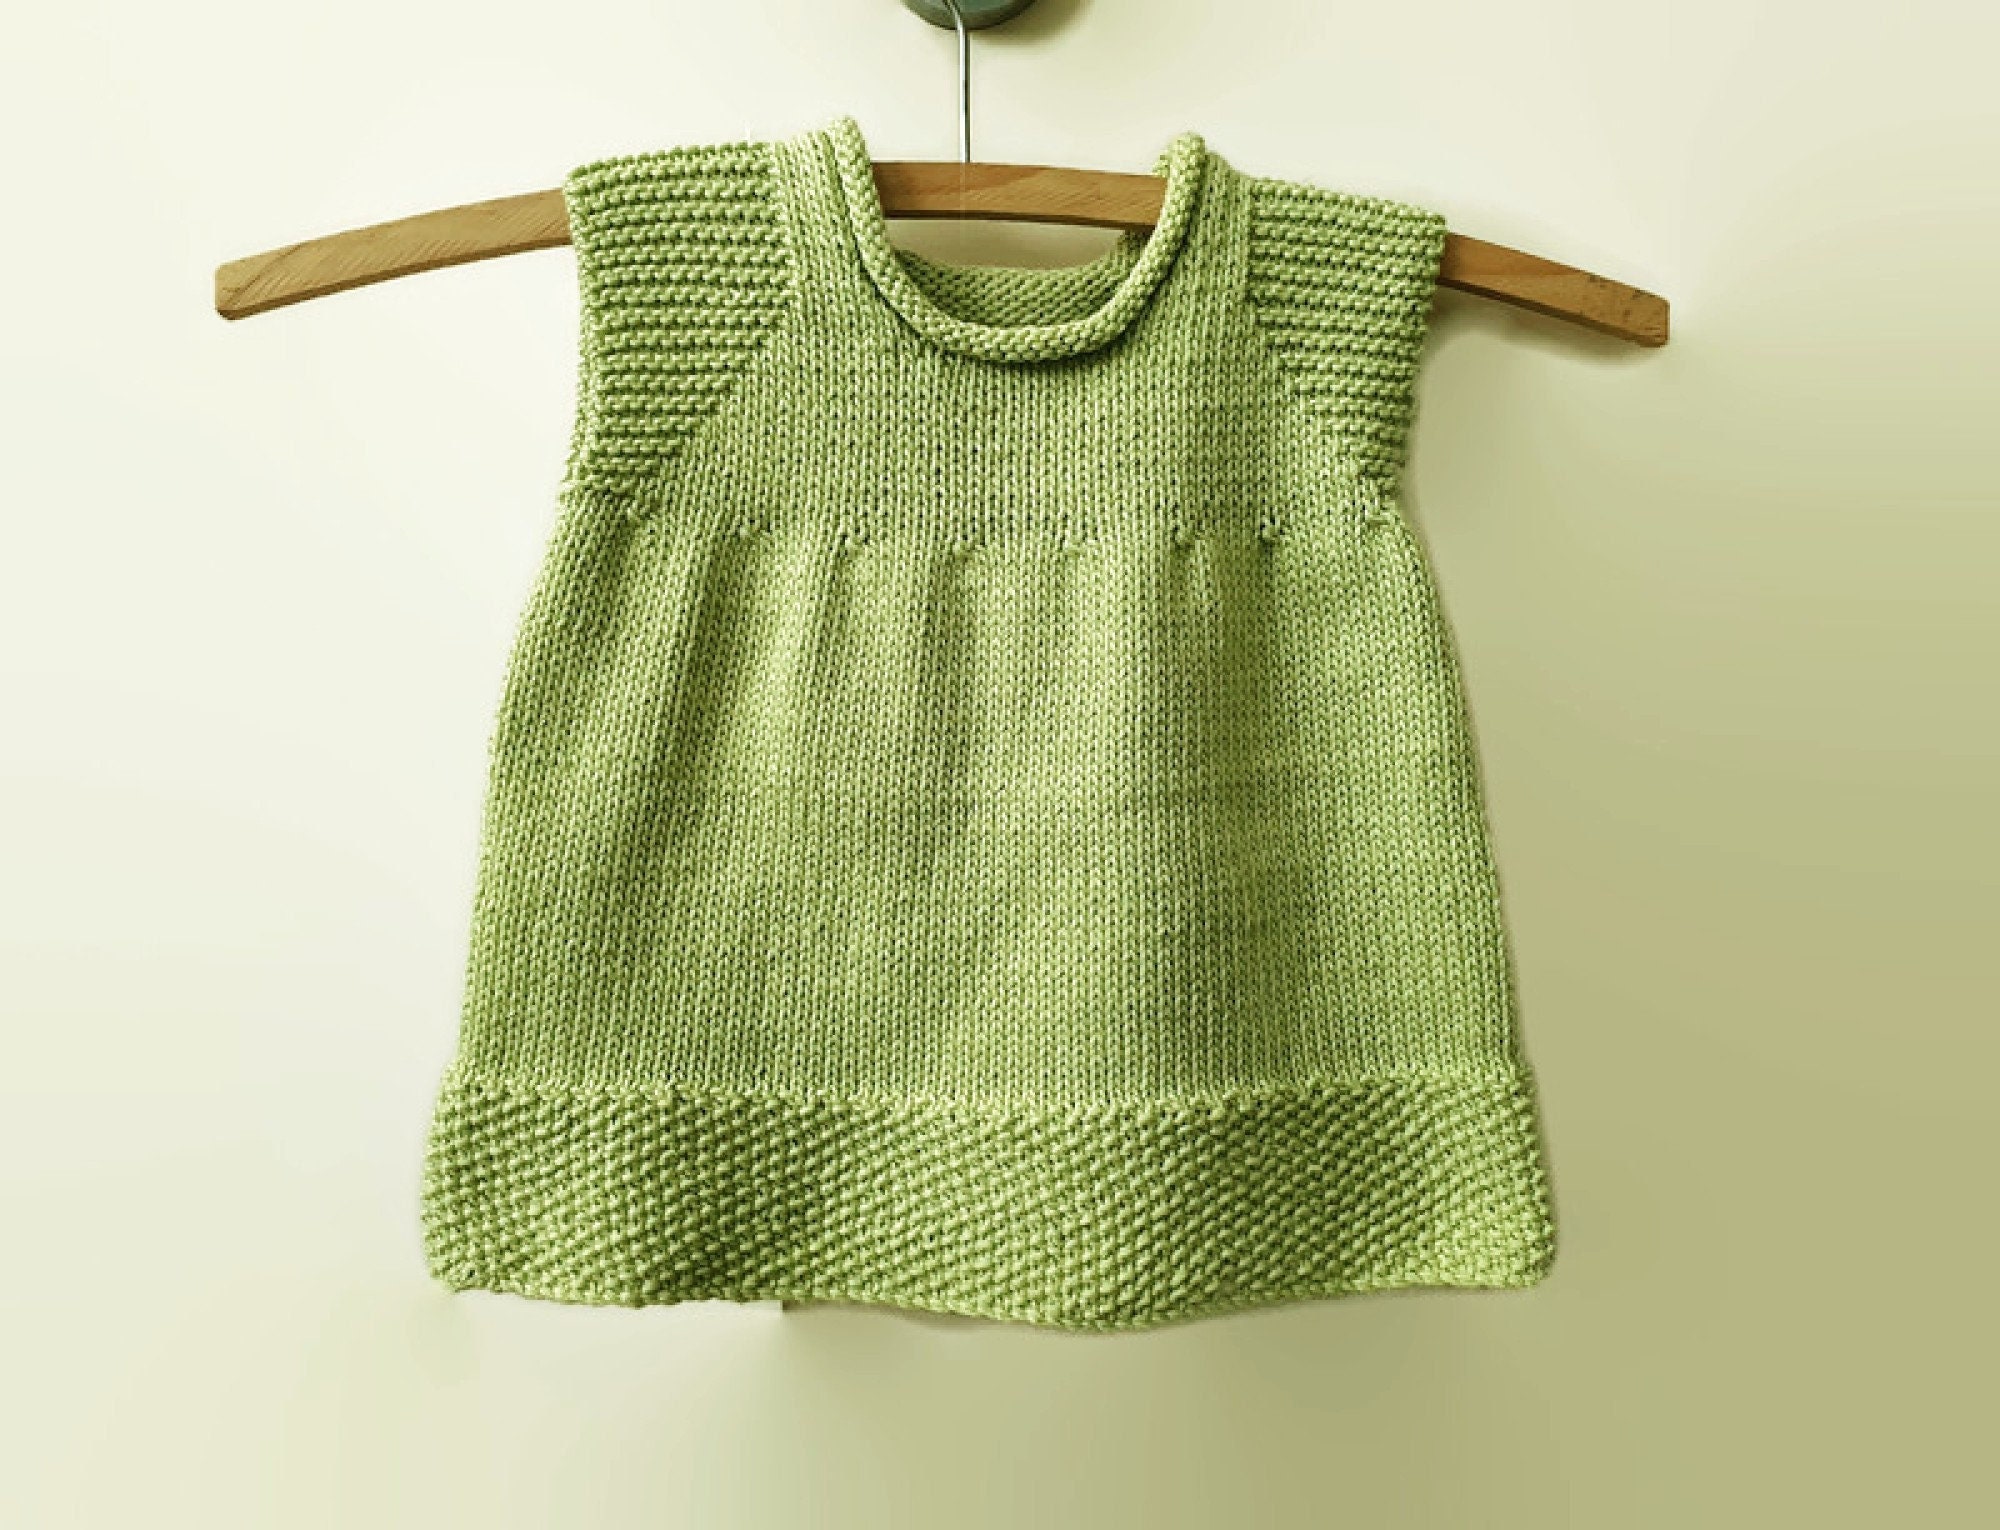 Handmade Cotton Baby Tunic Top Cap Sleeves Knitted 6 Months - Etsy ...